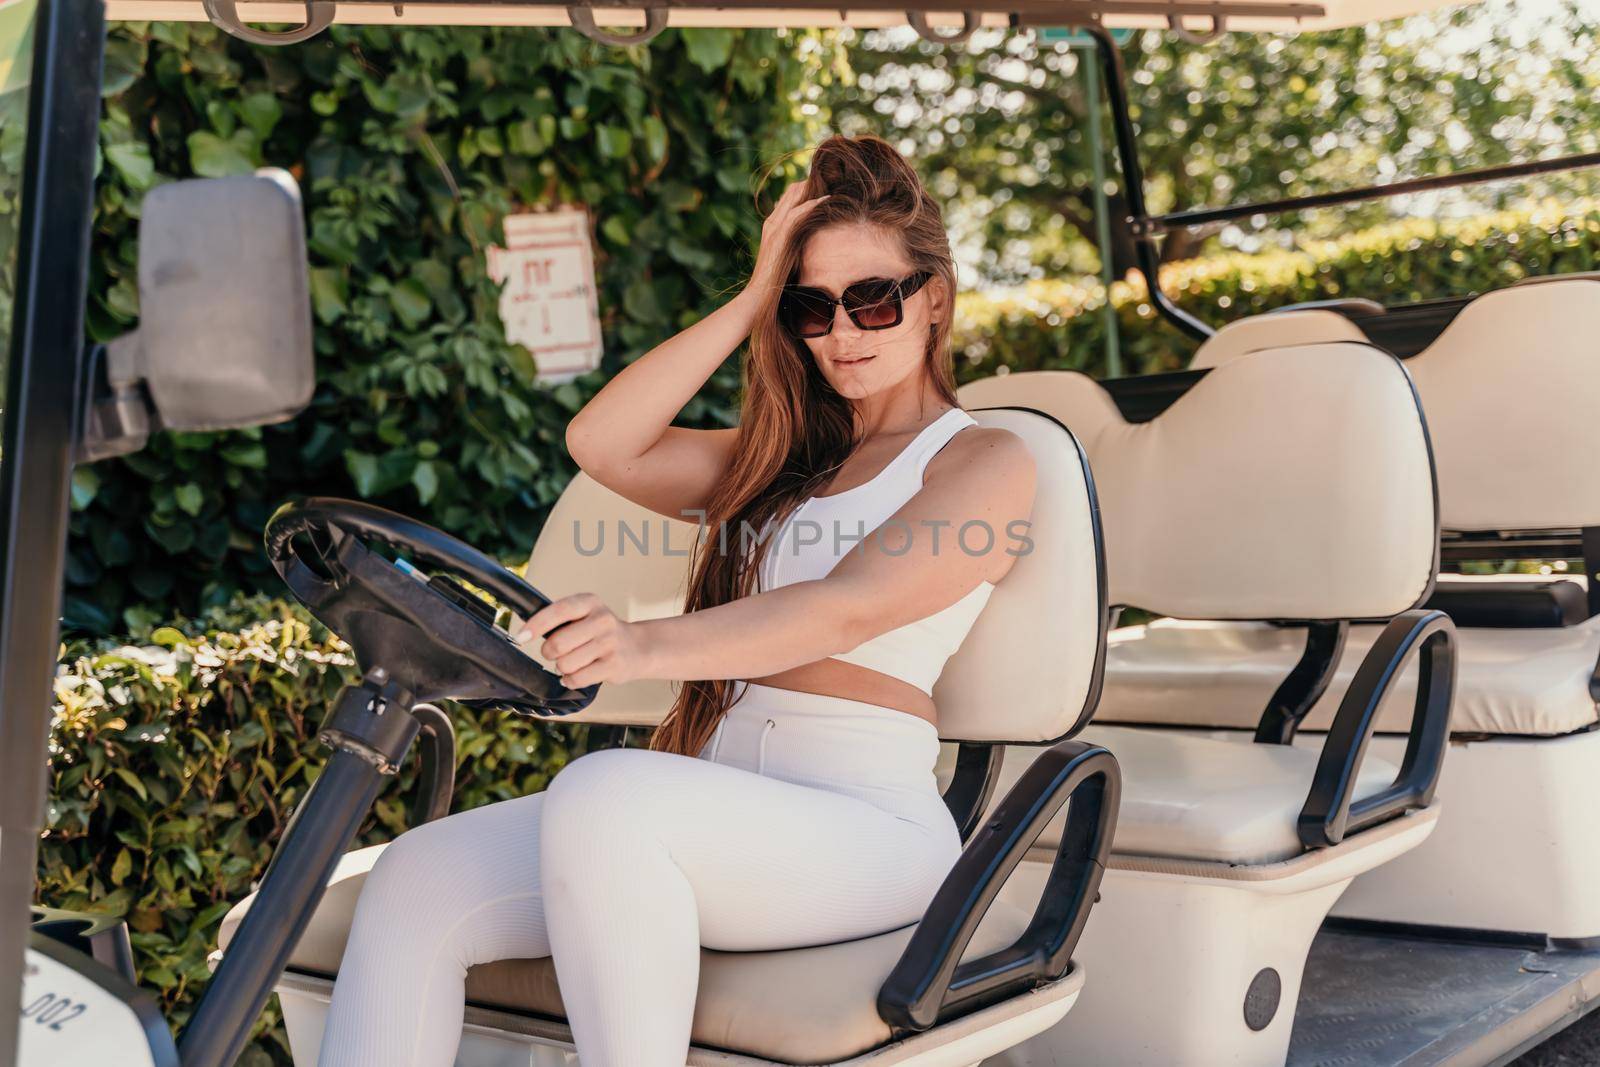 A middle-aged woman is driving a car for transporting tourists. Electric car, Tourist bus. Car for transporting people around the hotel, park, golf club.